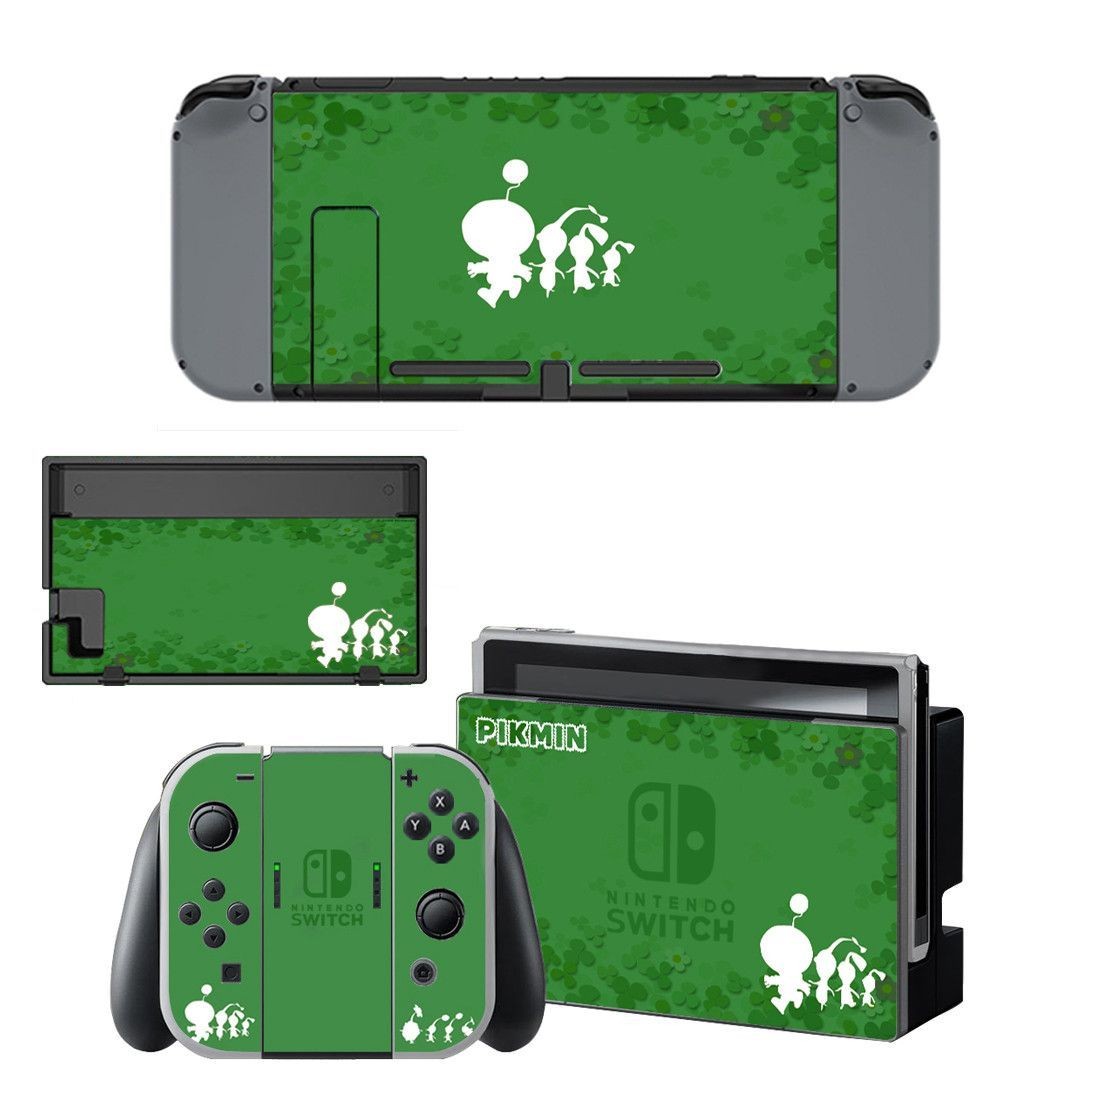 Pikmin Papercraft Pikmin Nintendo Switch Skin Decal for Console Pikmin